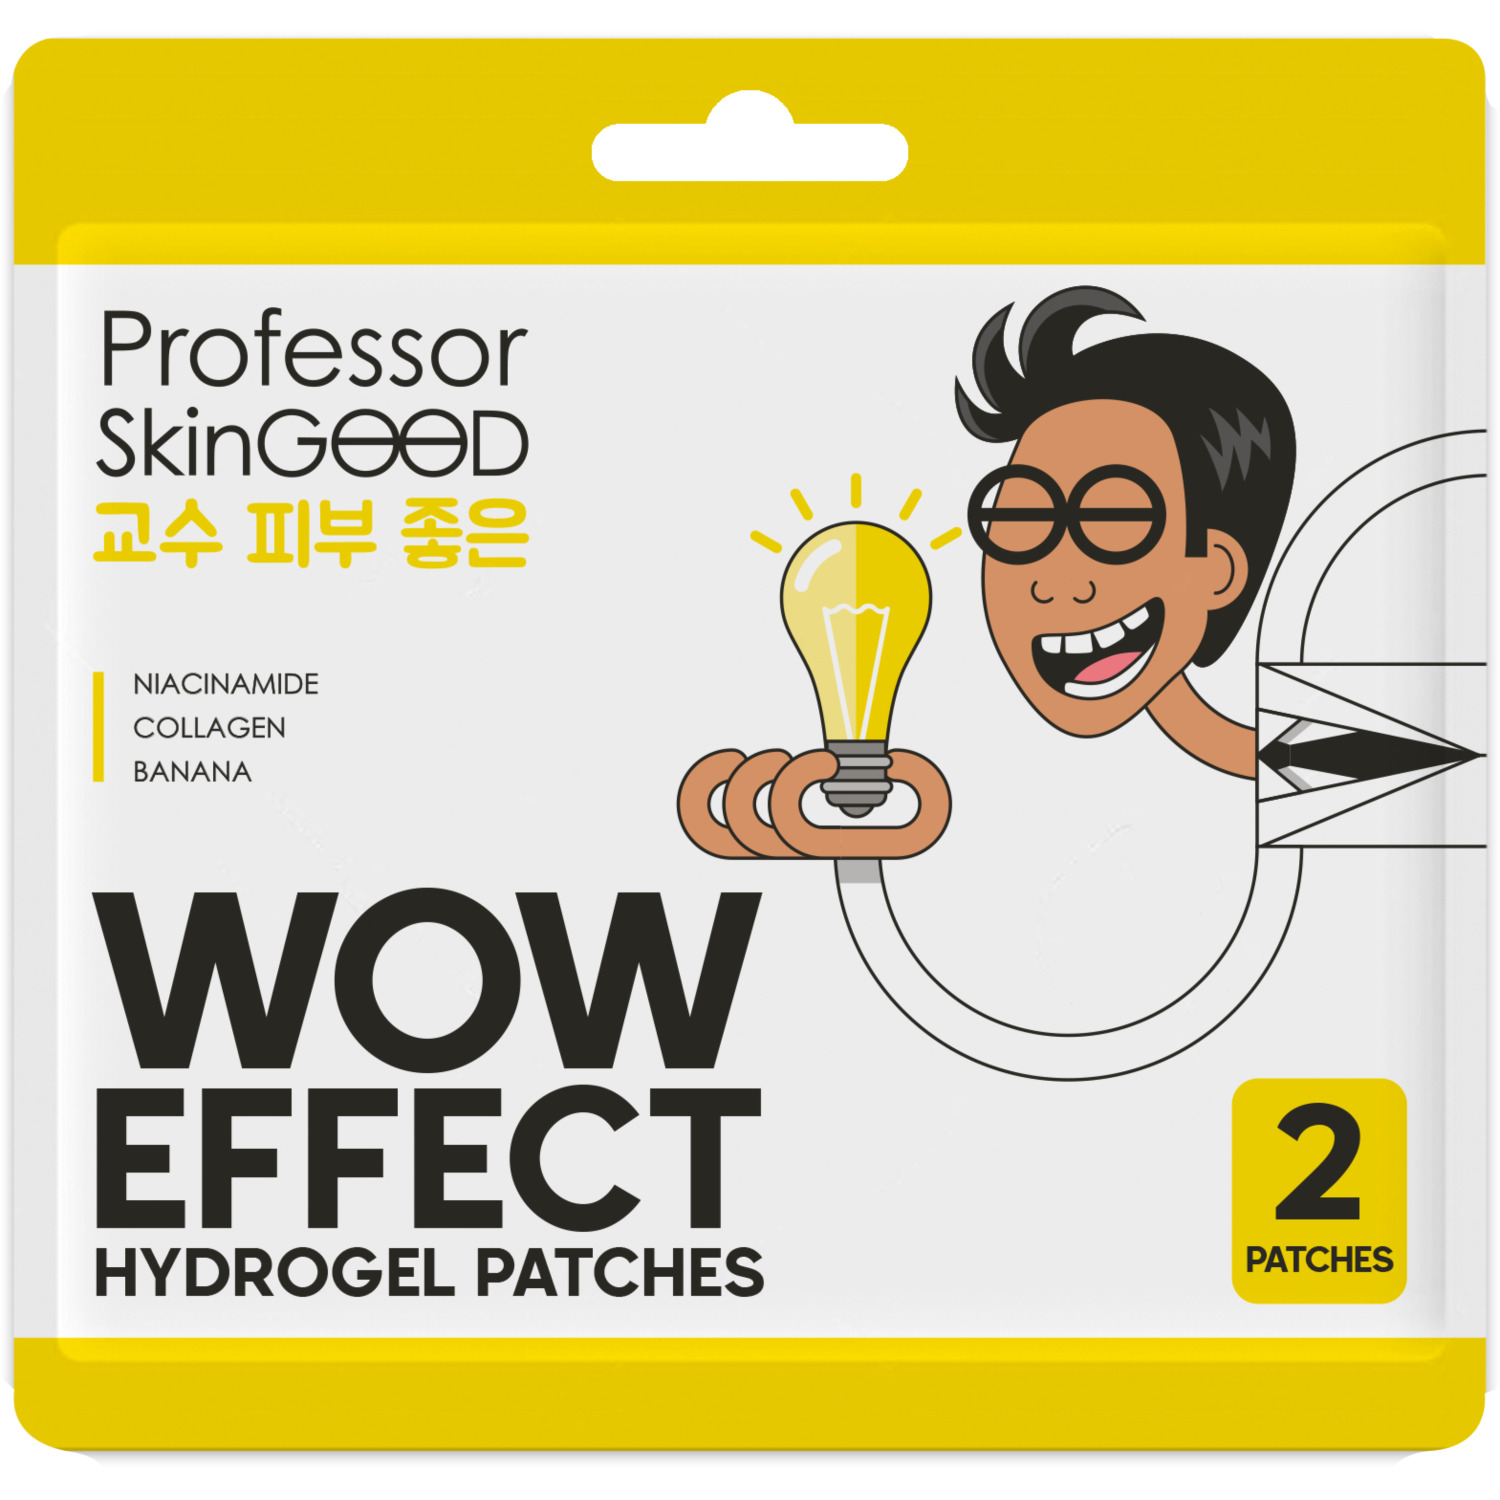 Professor SkinGOOD Гидрогелевые патчи Wow Effect Hydrogel Patches 2шт